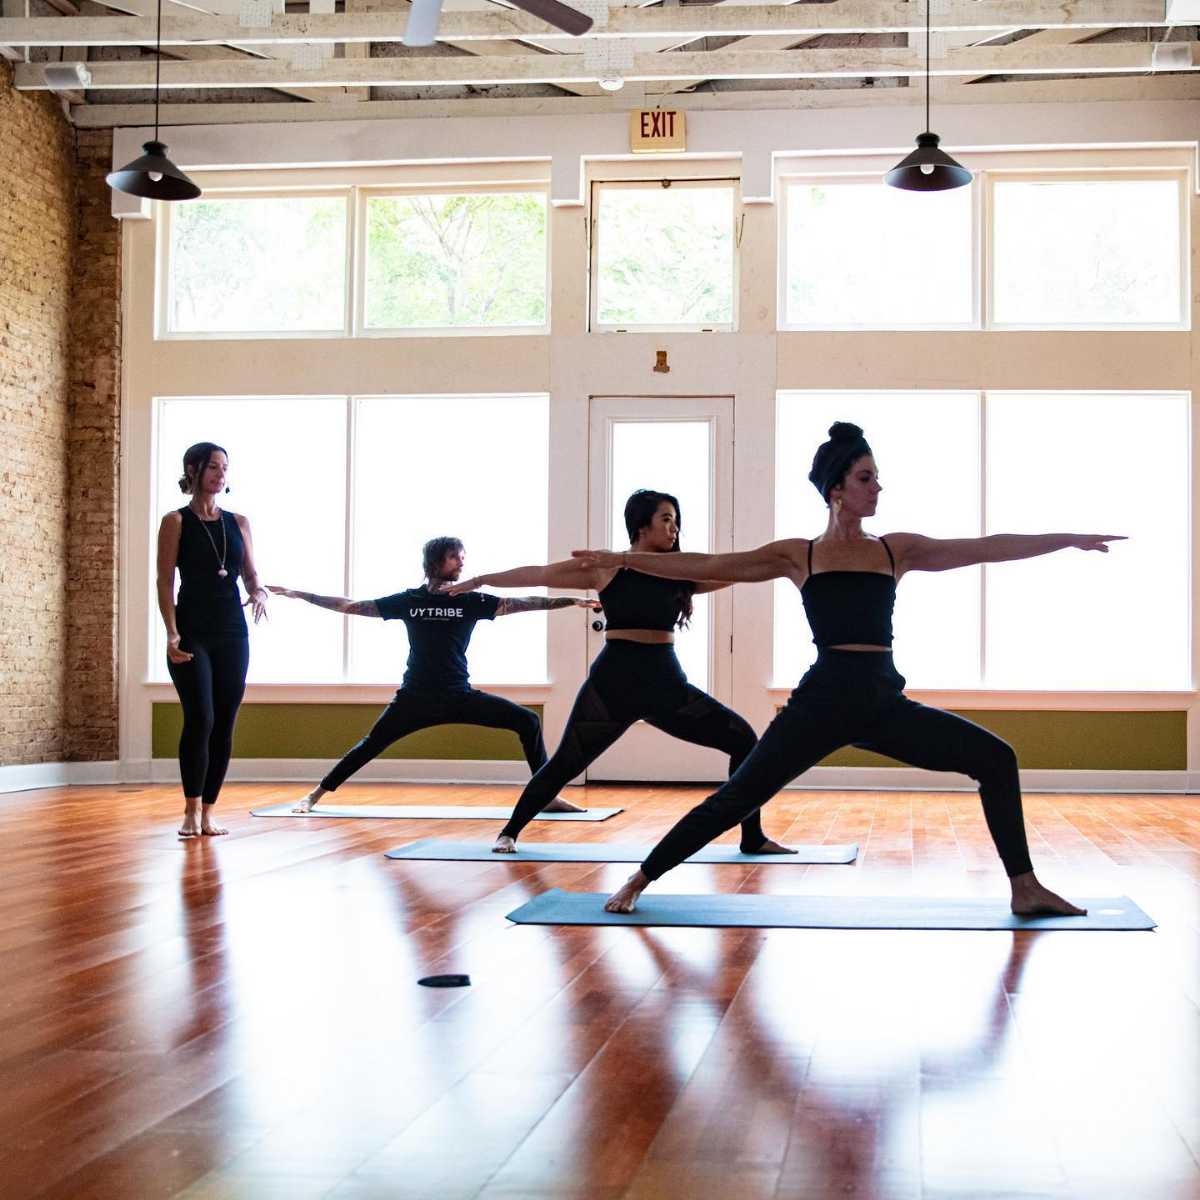 Is this place really hot, hot - - Uptown Yoga Dallas